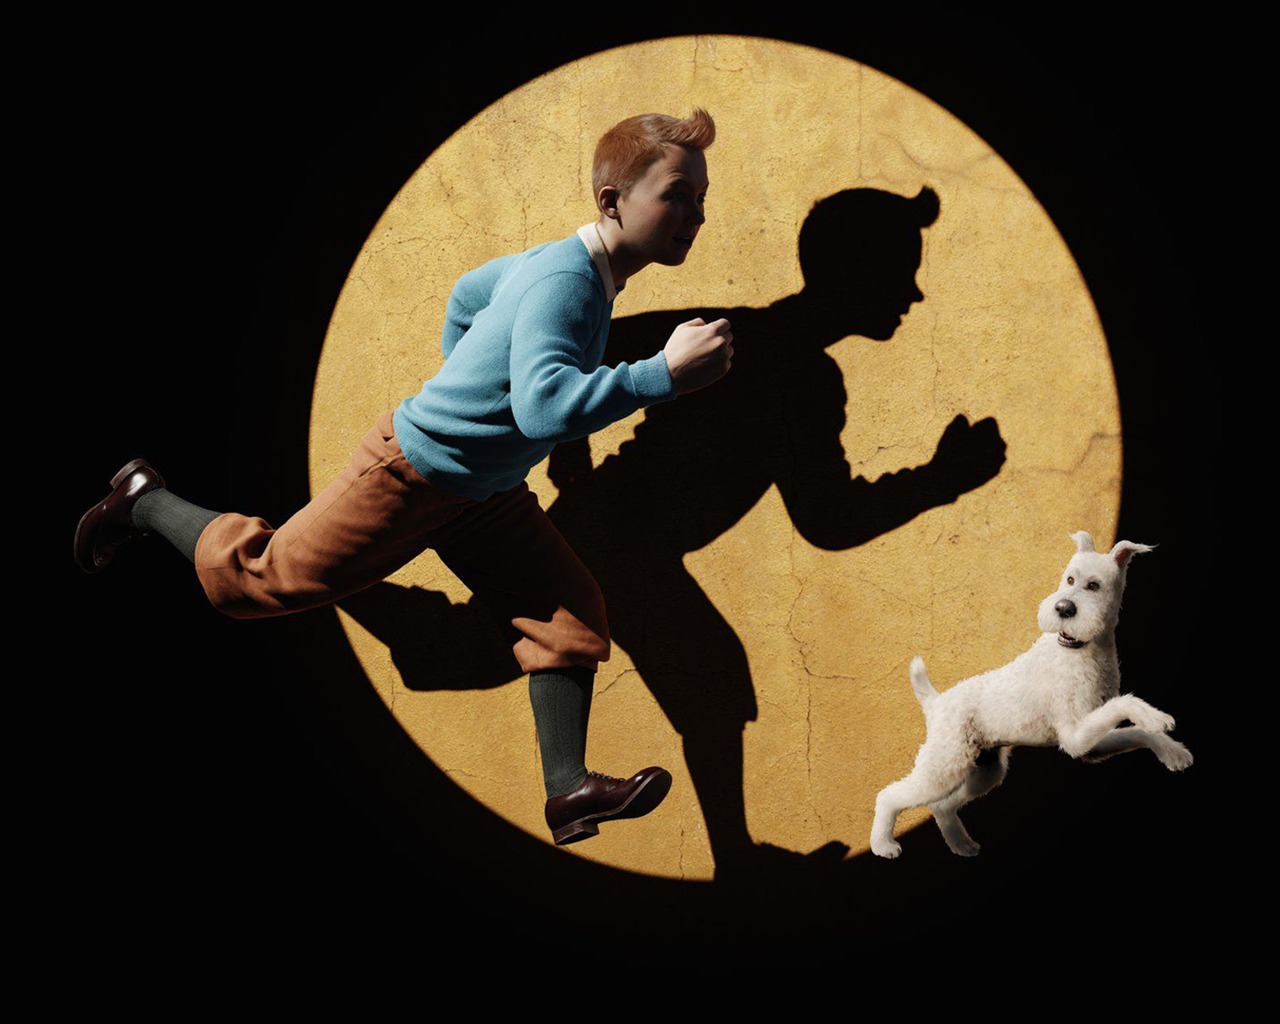 The Adventures of Tintin HD Wallpapers #15 - 1280x1024